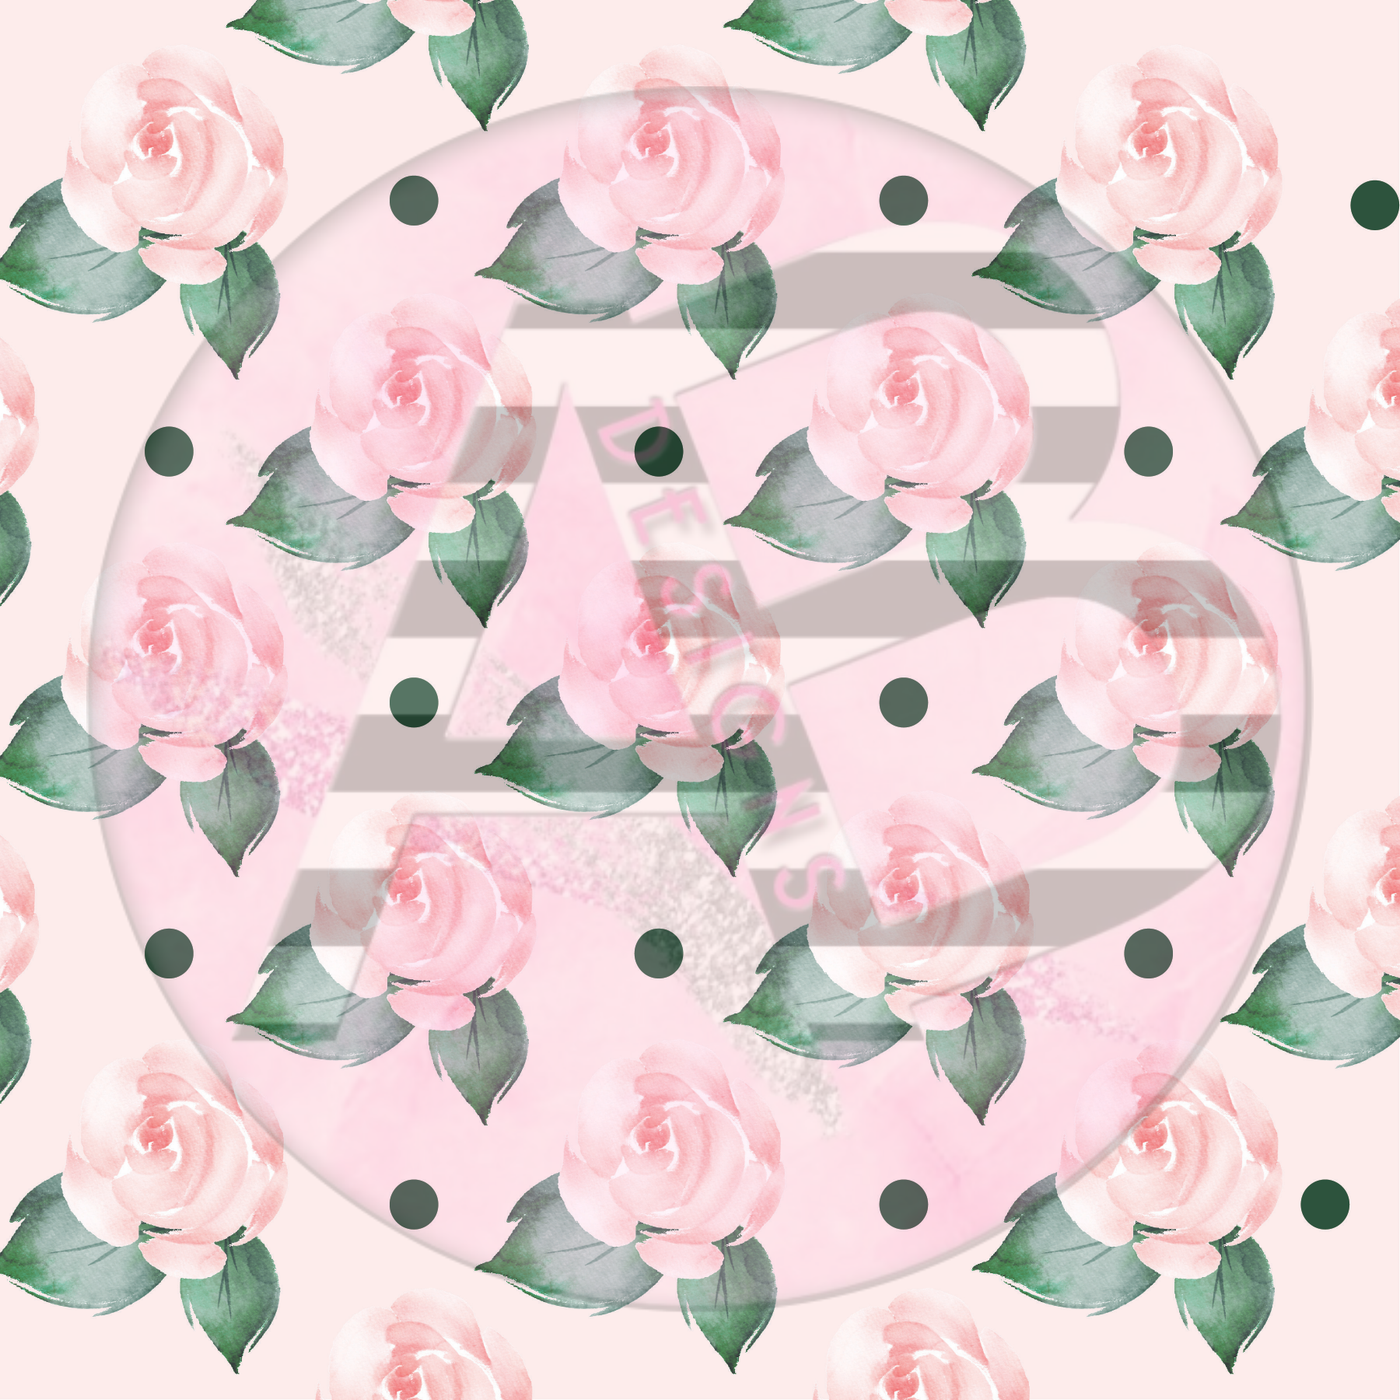 Adhesive Patterned Vinyl - Blush and Emerald Floral 01